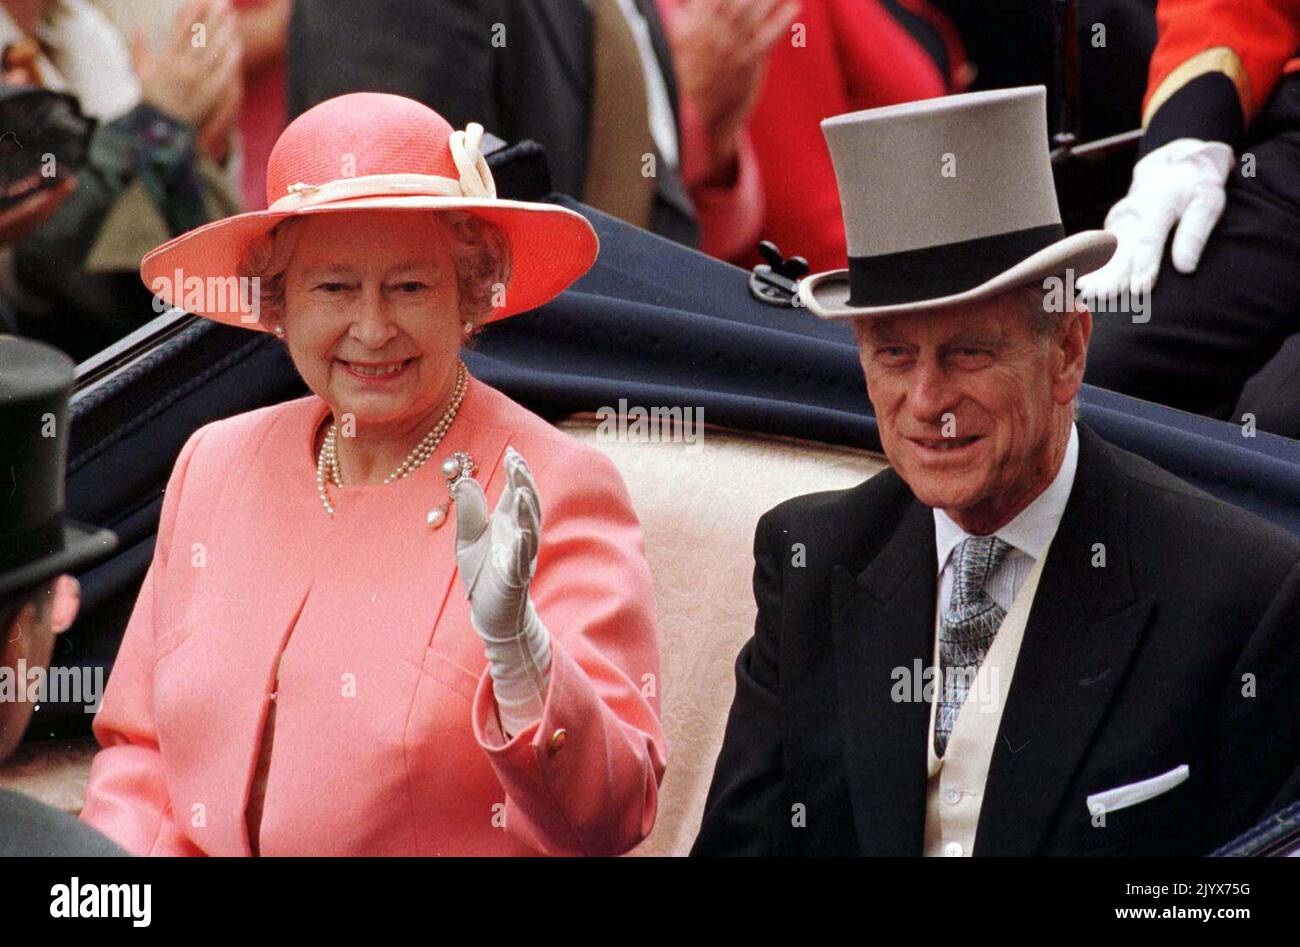 File photo dated 6/06/1998 of Queen Elizabeth II and the Duke of Edinburgh arriving at Ascot racecourse. The Queen died peacefully at Balmoral this afternoon, Buckingham Palace has announced. Issue date: Thursday September 8, 2022. Stock Photo